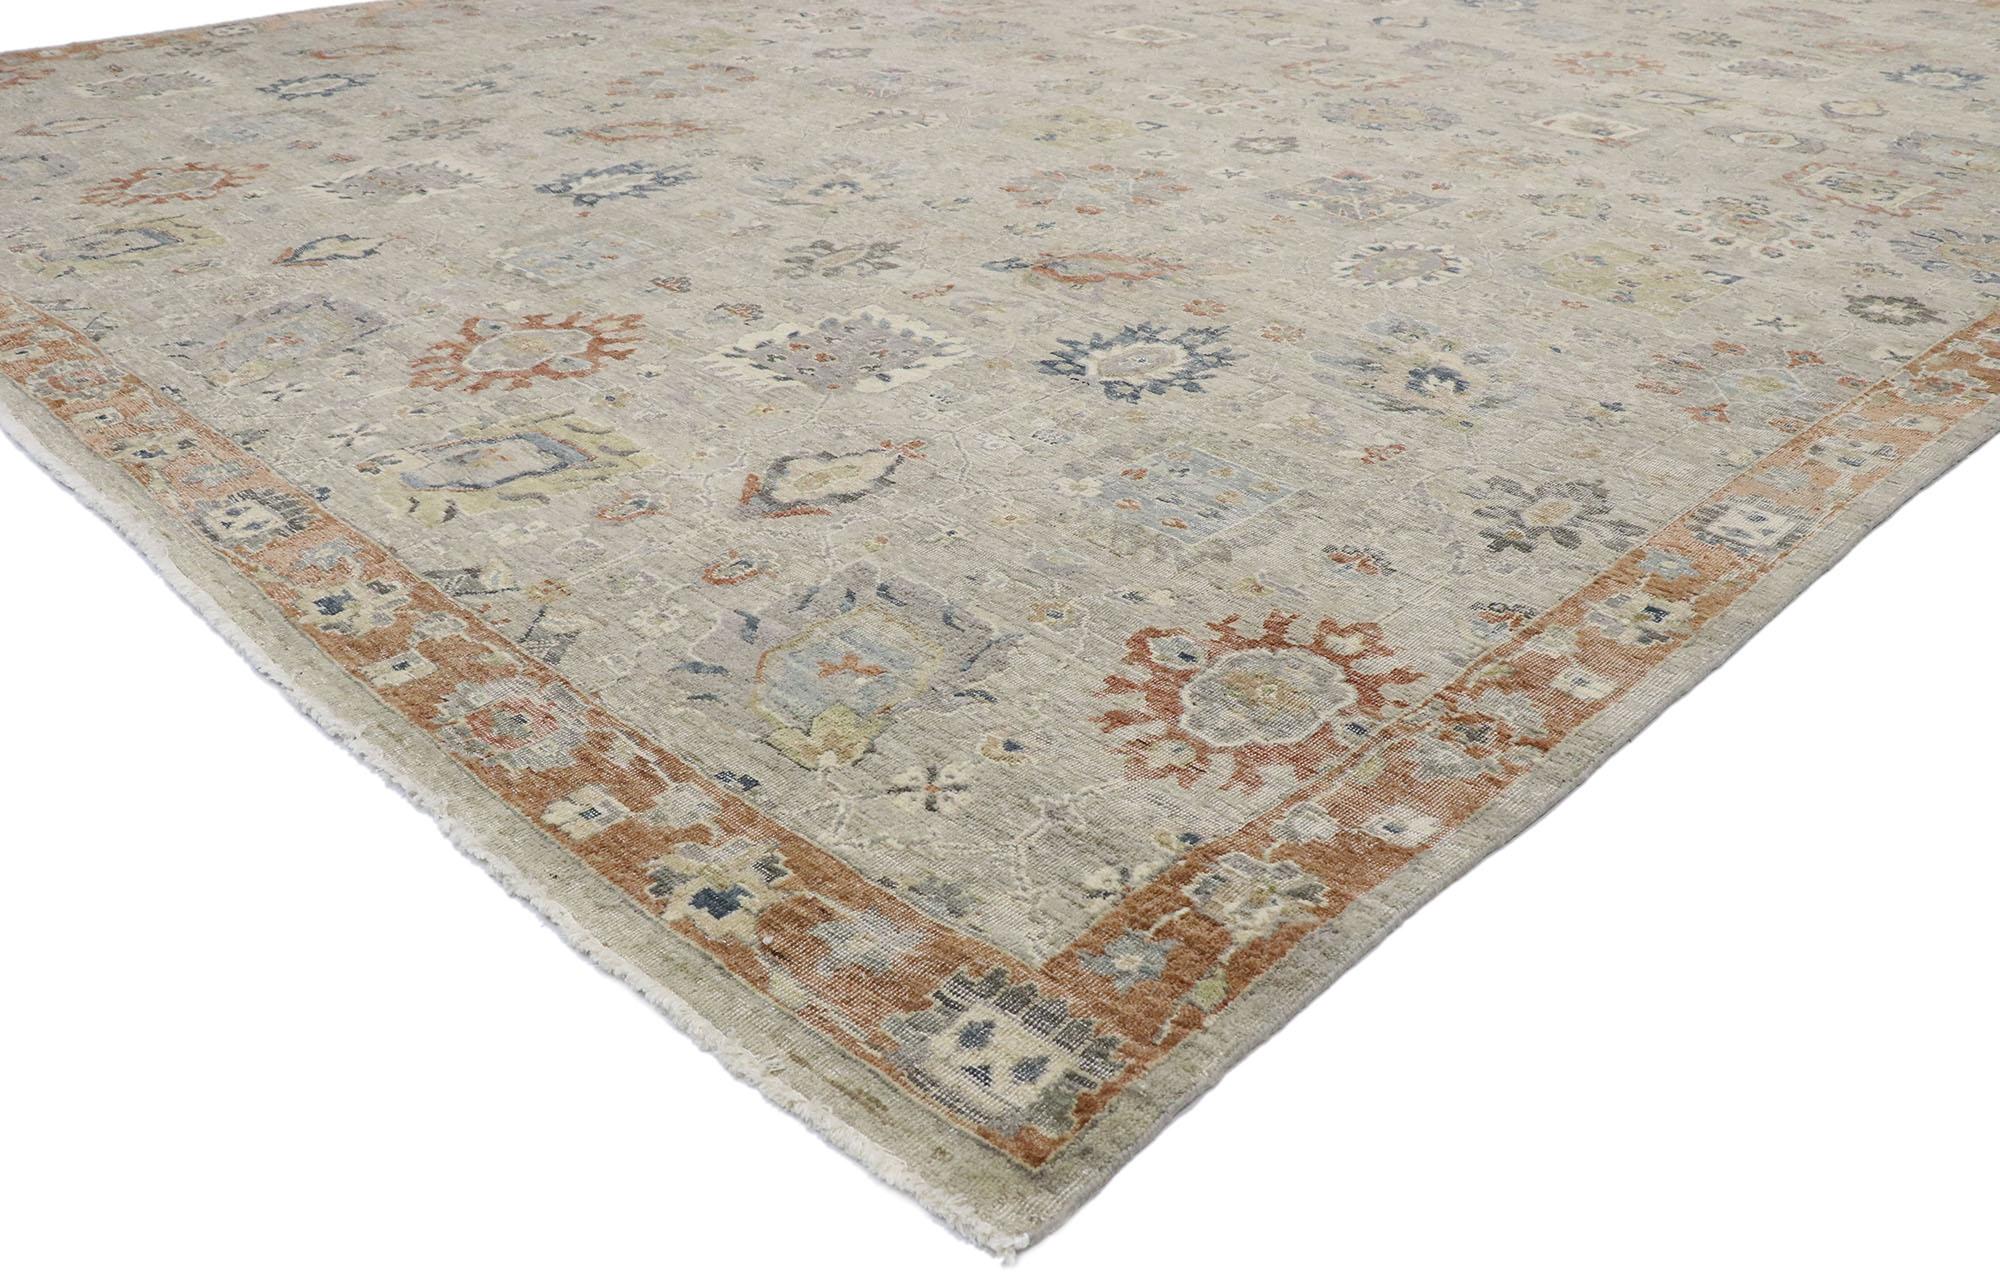 30629, distressed new contemporary Oushak style rug with rustic modern design. This hand-knotted wool new contemporary Oushak-style rug features an all-over botanical pattern spread across an abrashed and distressed light gray field. An array of